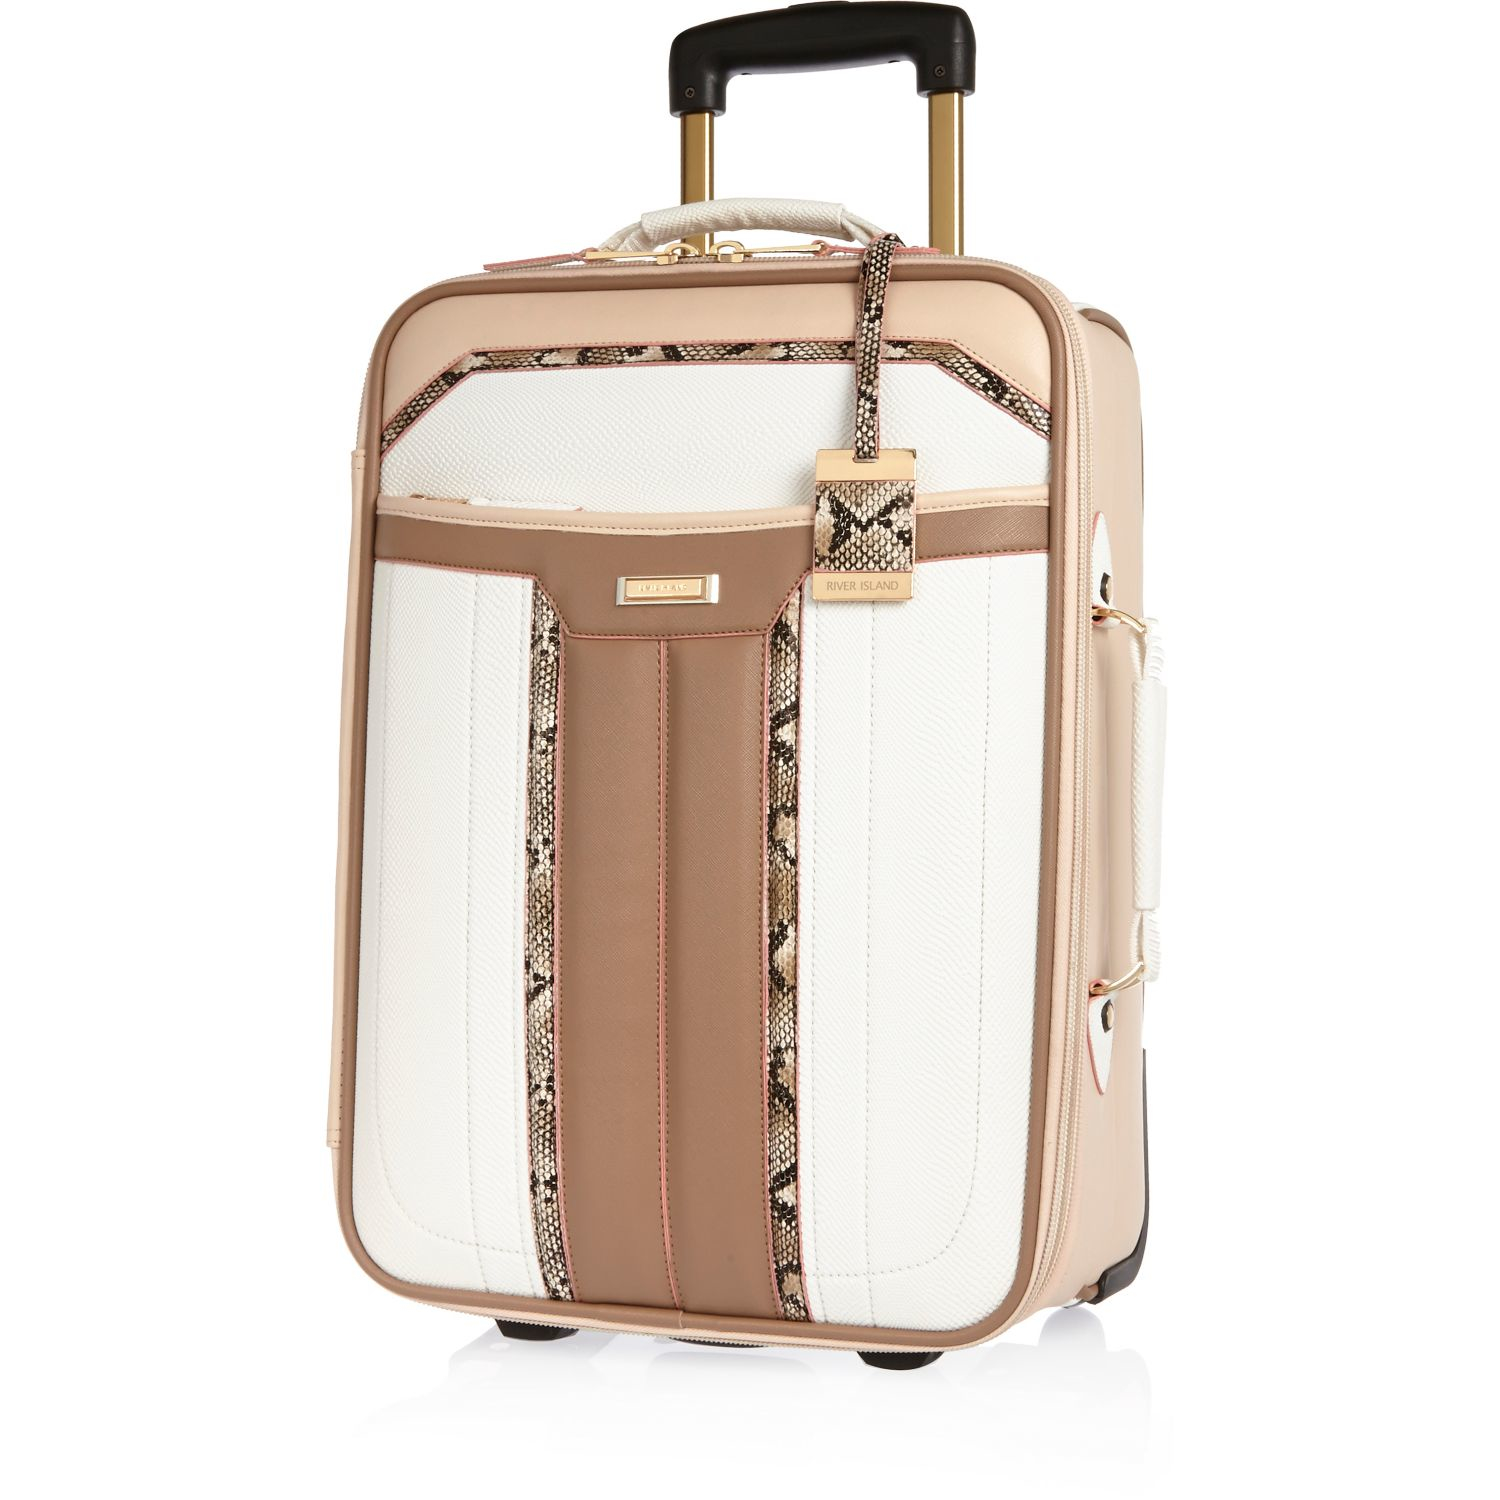 river-island-white-white-panneled-wheelie-suitcase-product-3-549030798-normal